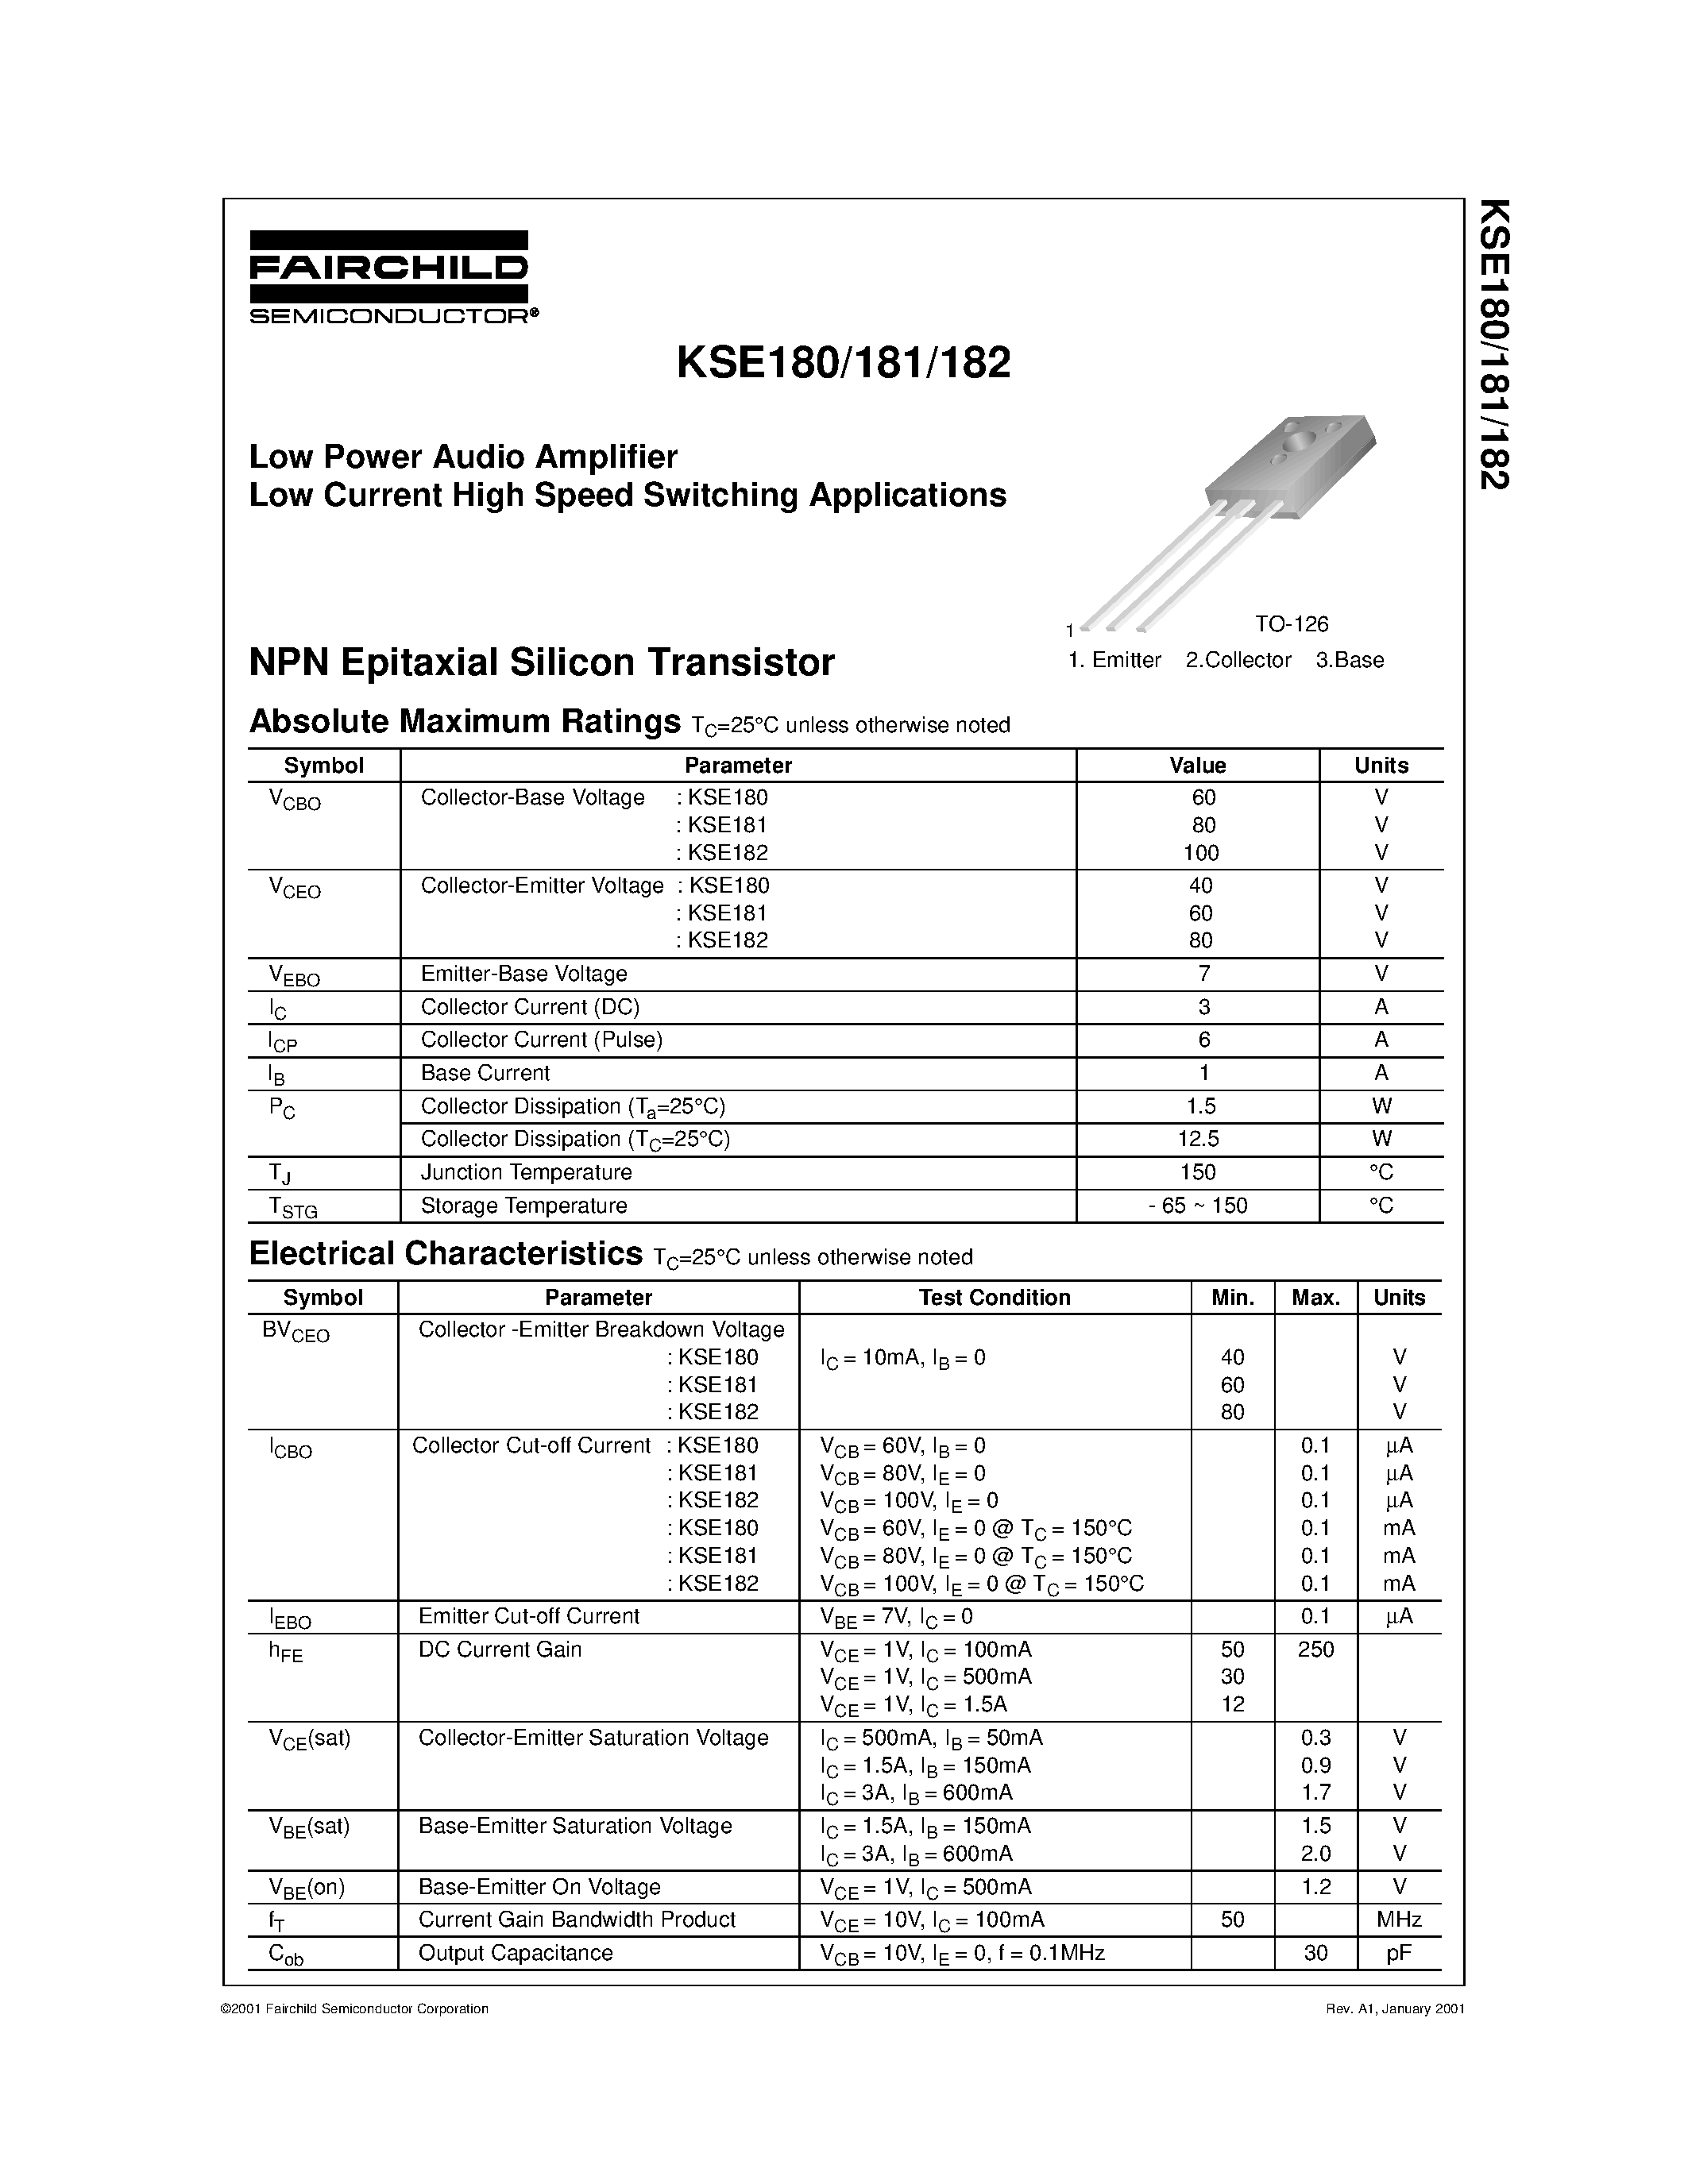 Datasheet KSE182 - Low Power Audio Amplifier Low Current High Speed Switching Applications page 1